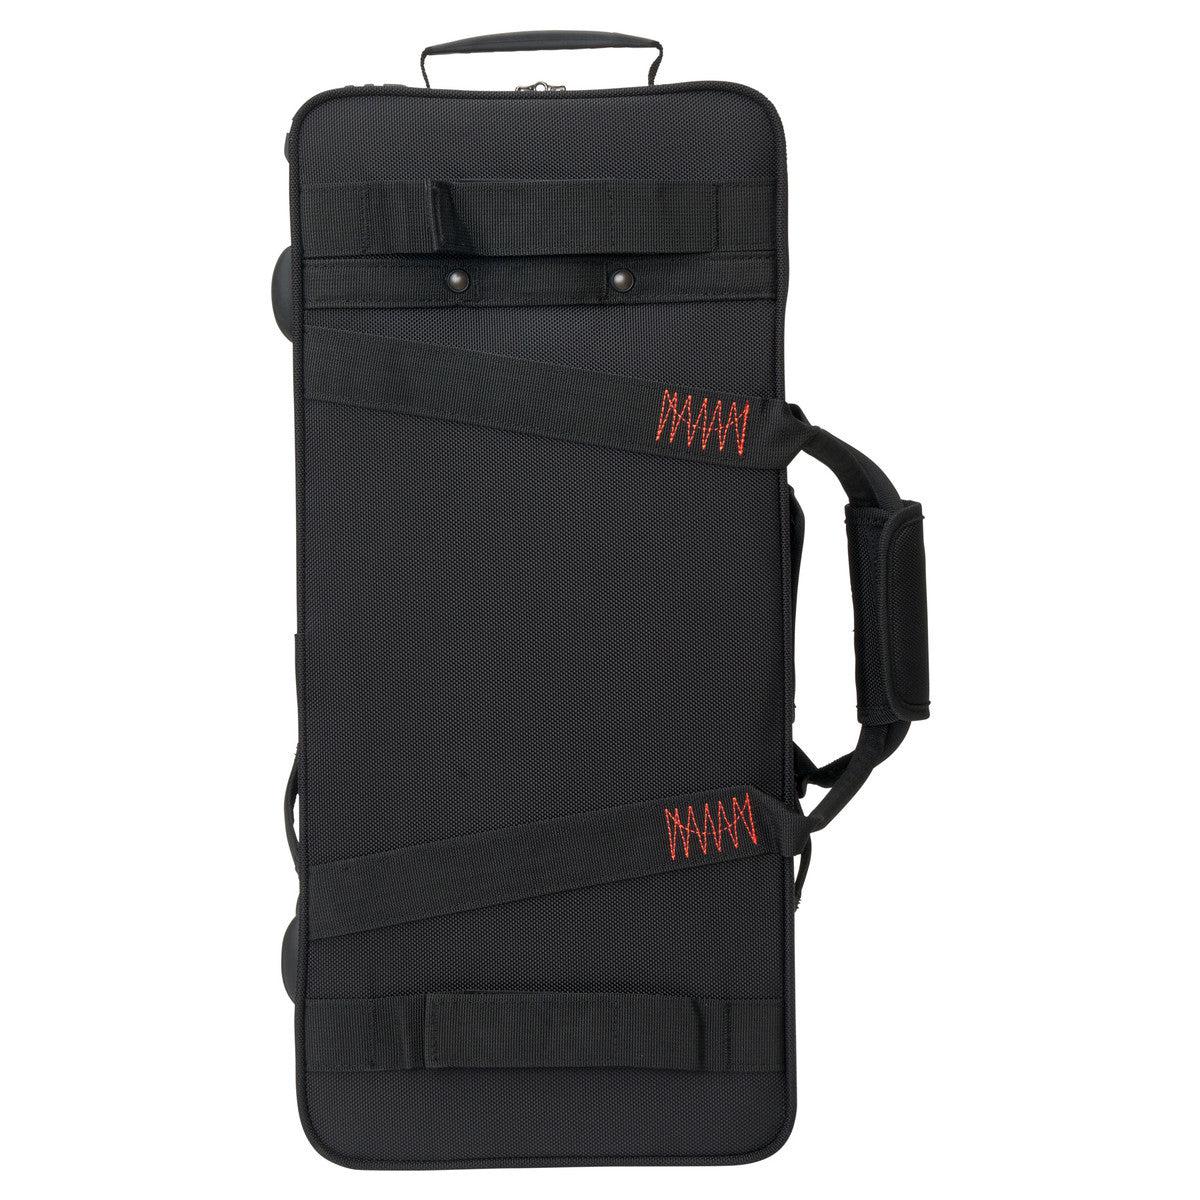 Protec IPAC Double Trumpet Case IP301D-Andy's Music